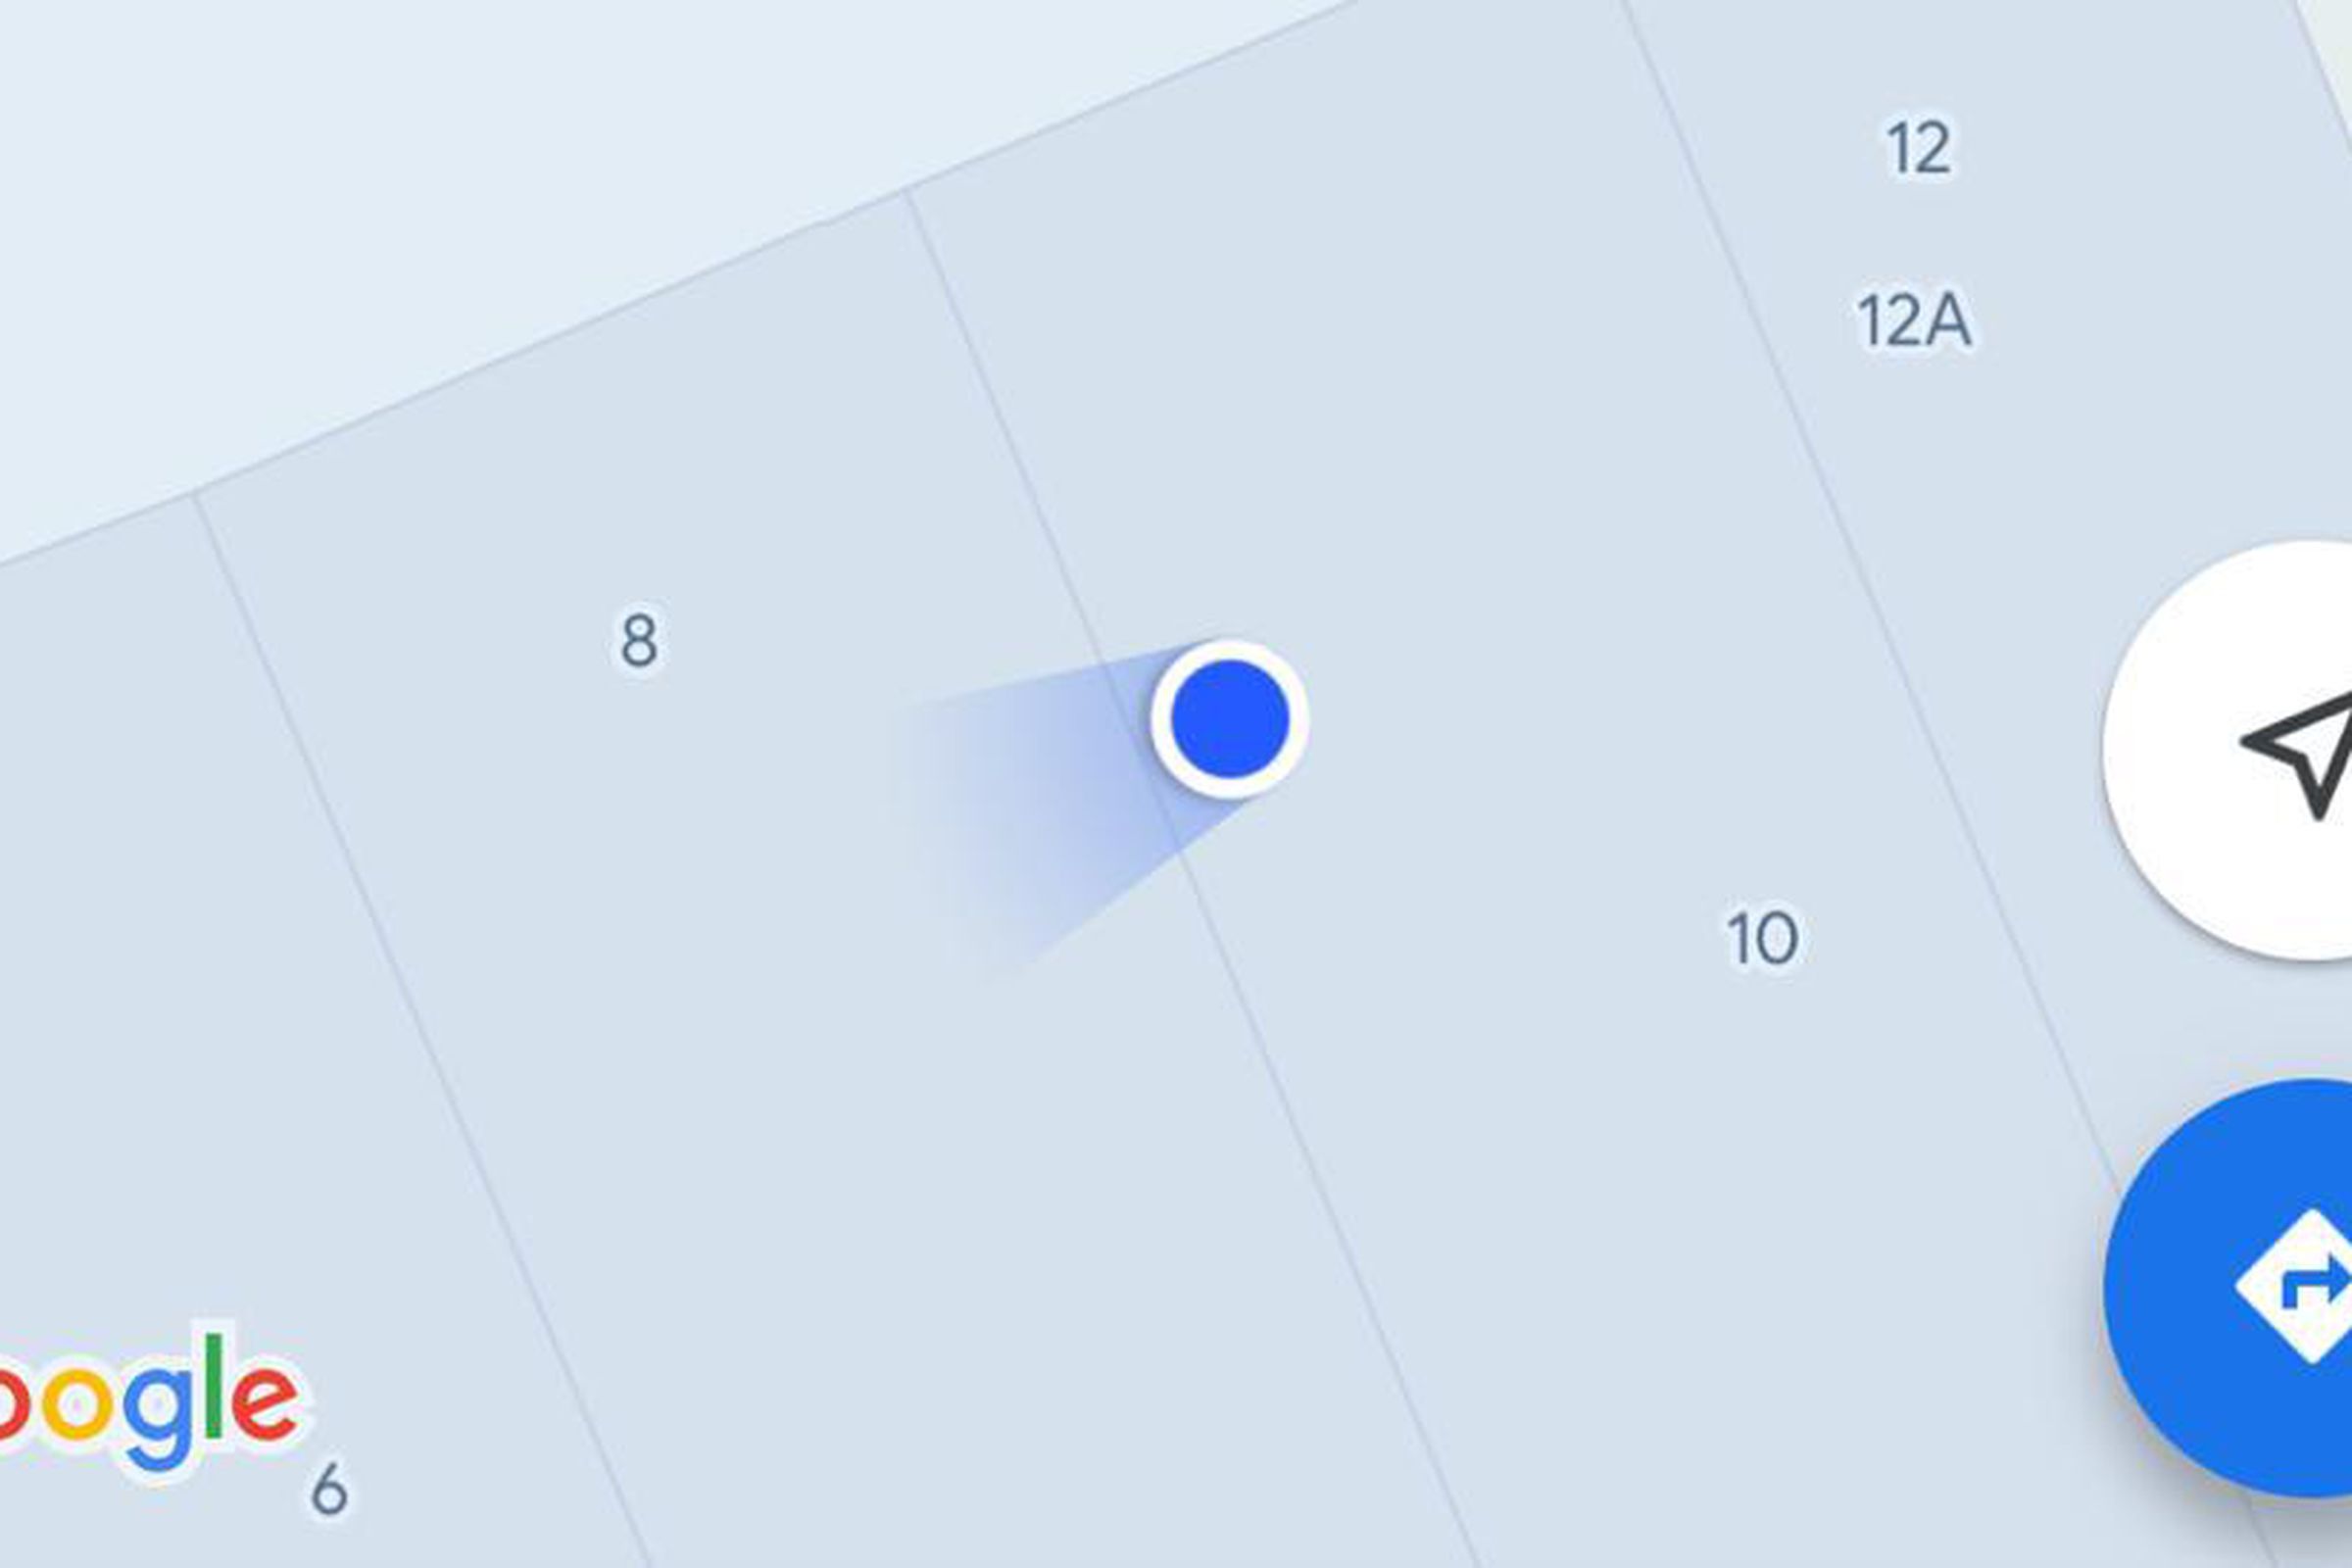 An image of the blue dot Google Maps uses to signify your current location on a map.